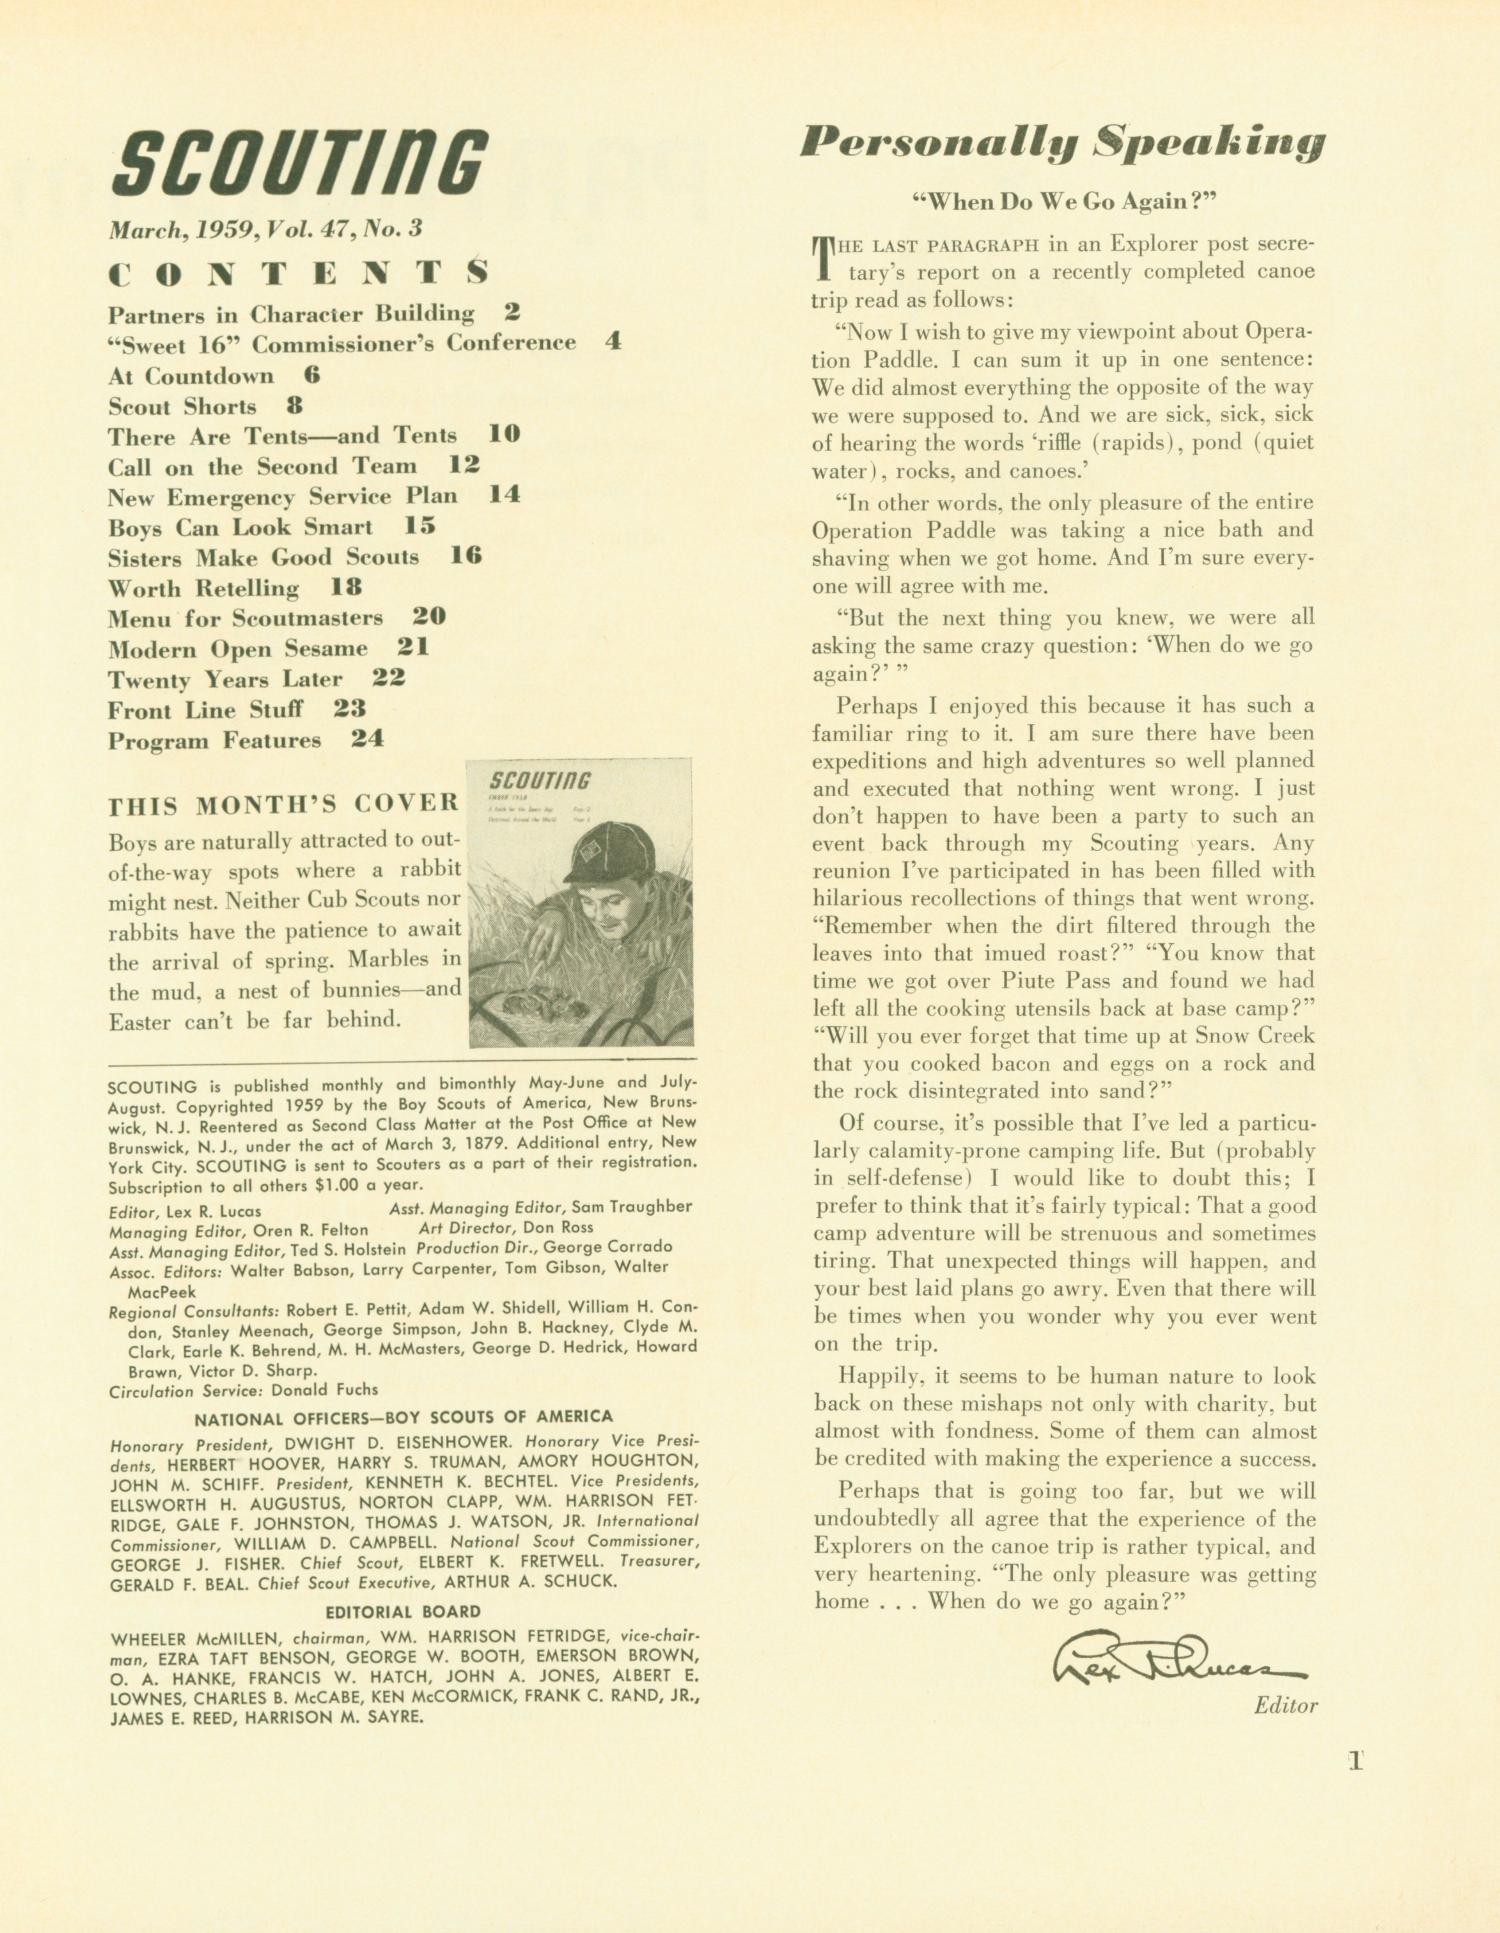 Scouting, Volume 47, Number 3, March 1959
                                                
                                                    1
                                                